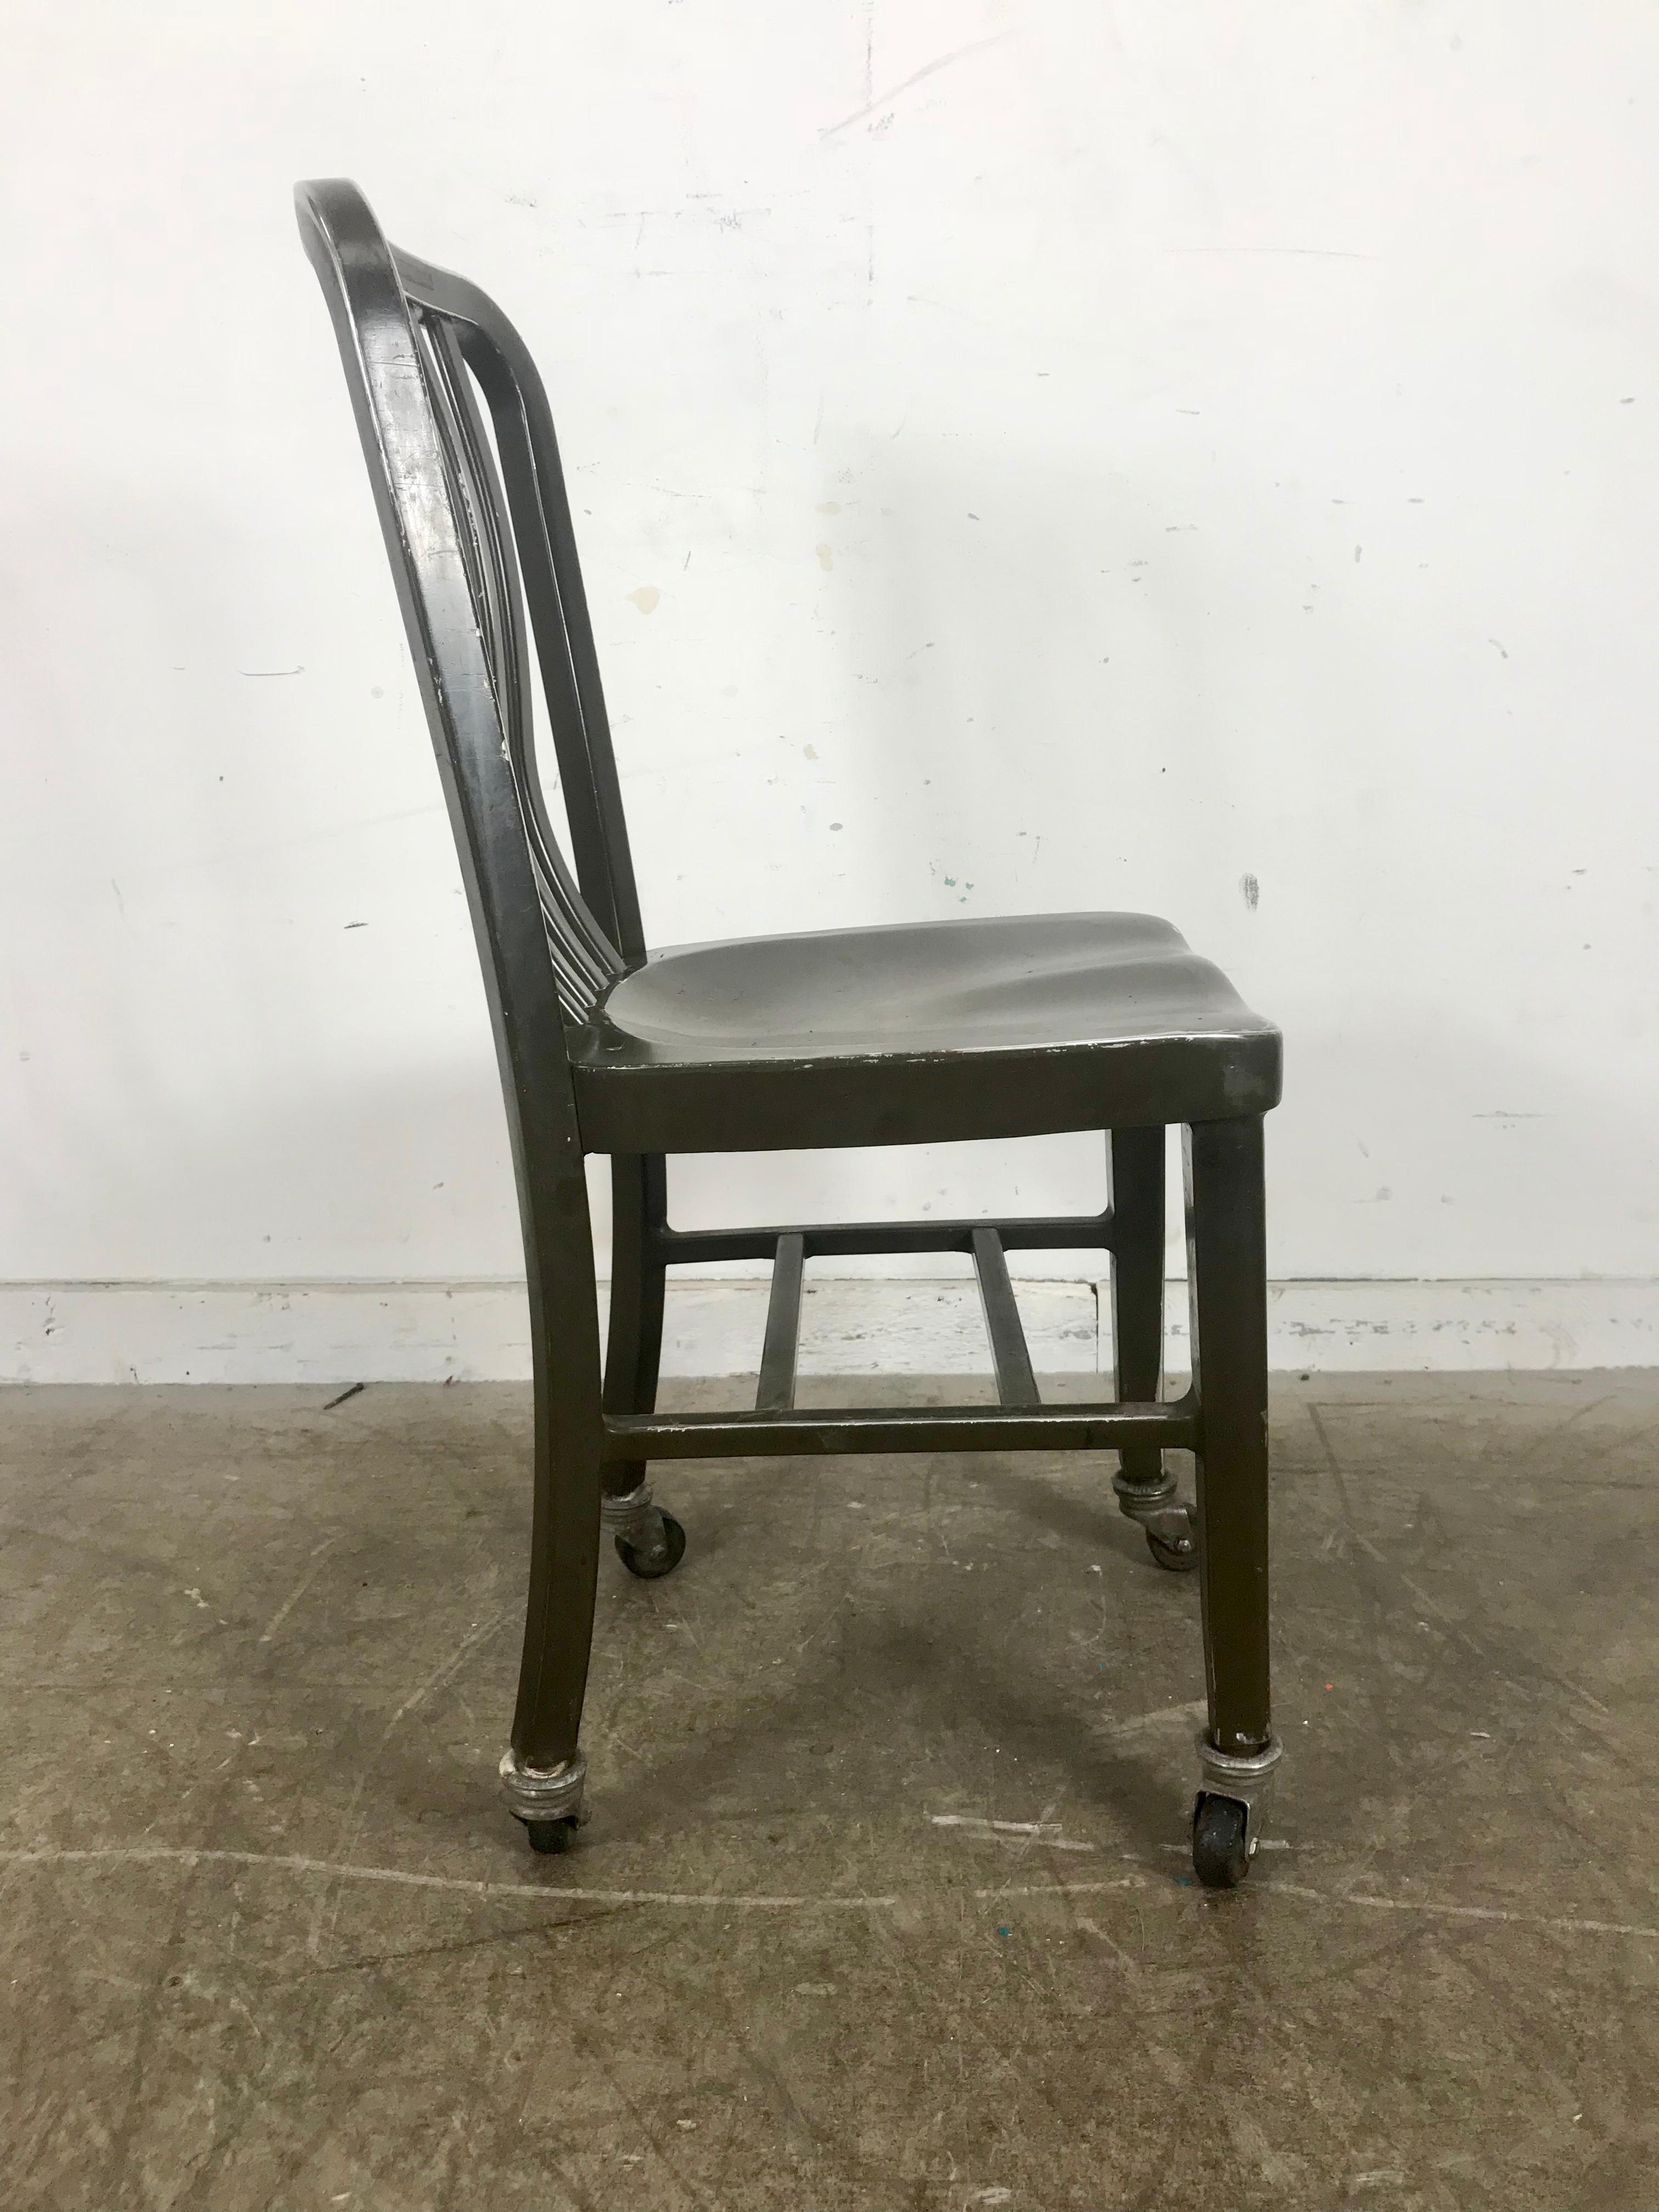 American Antique Industrial Aluminum Rolling Desk Chair by General Fireproofing Co. For Sale